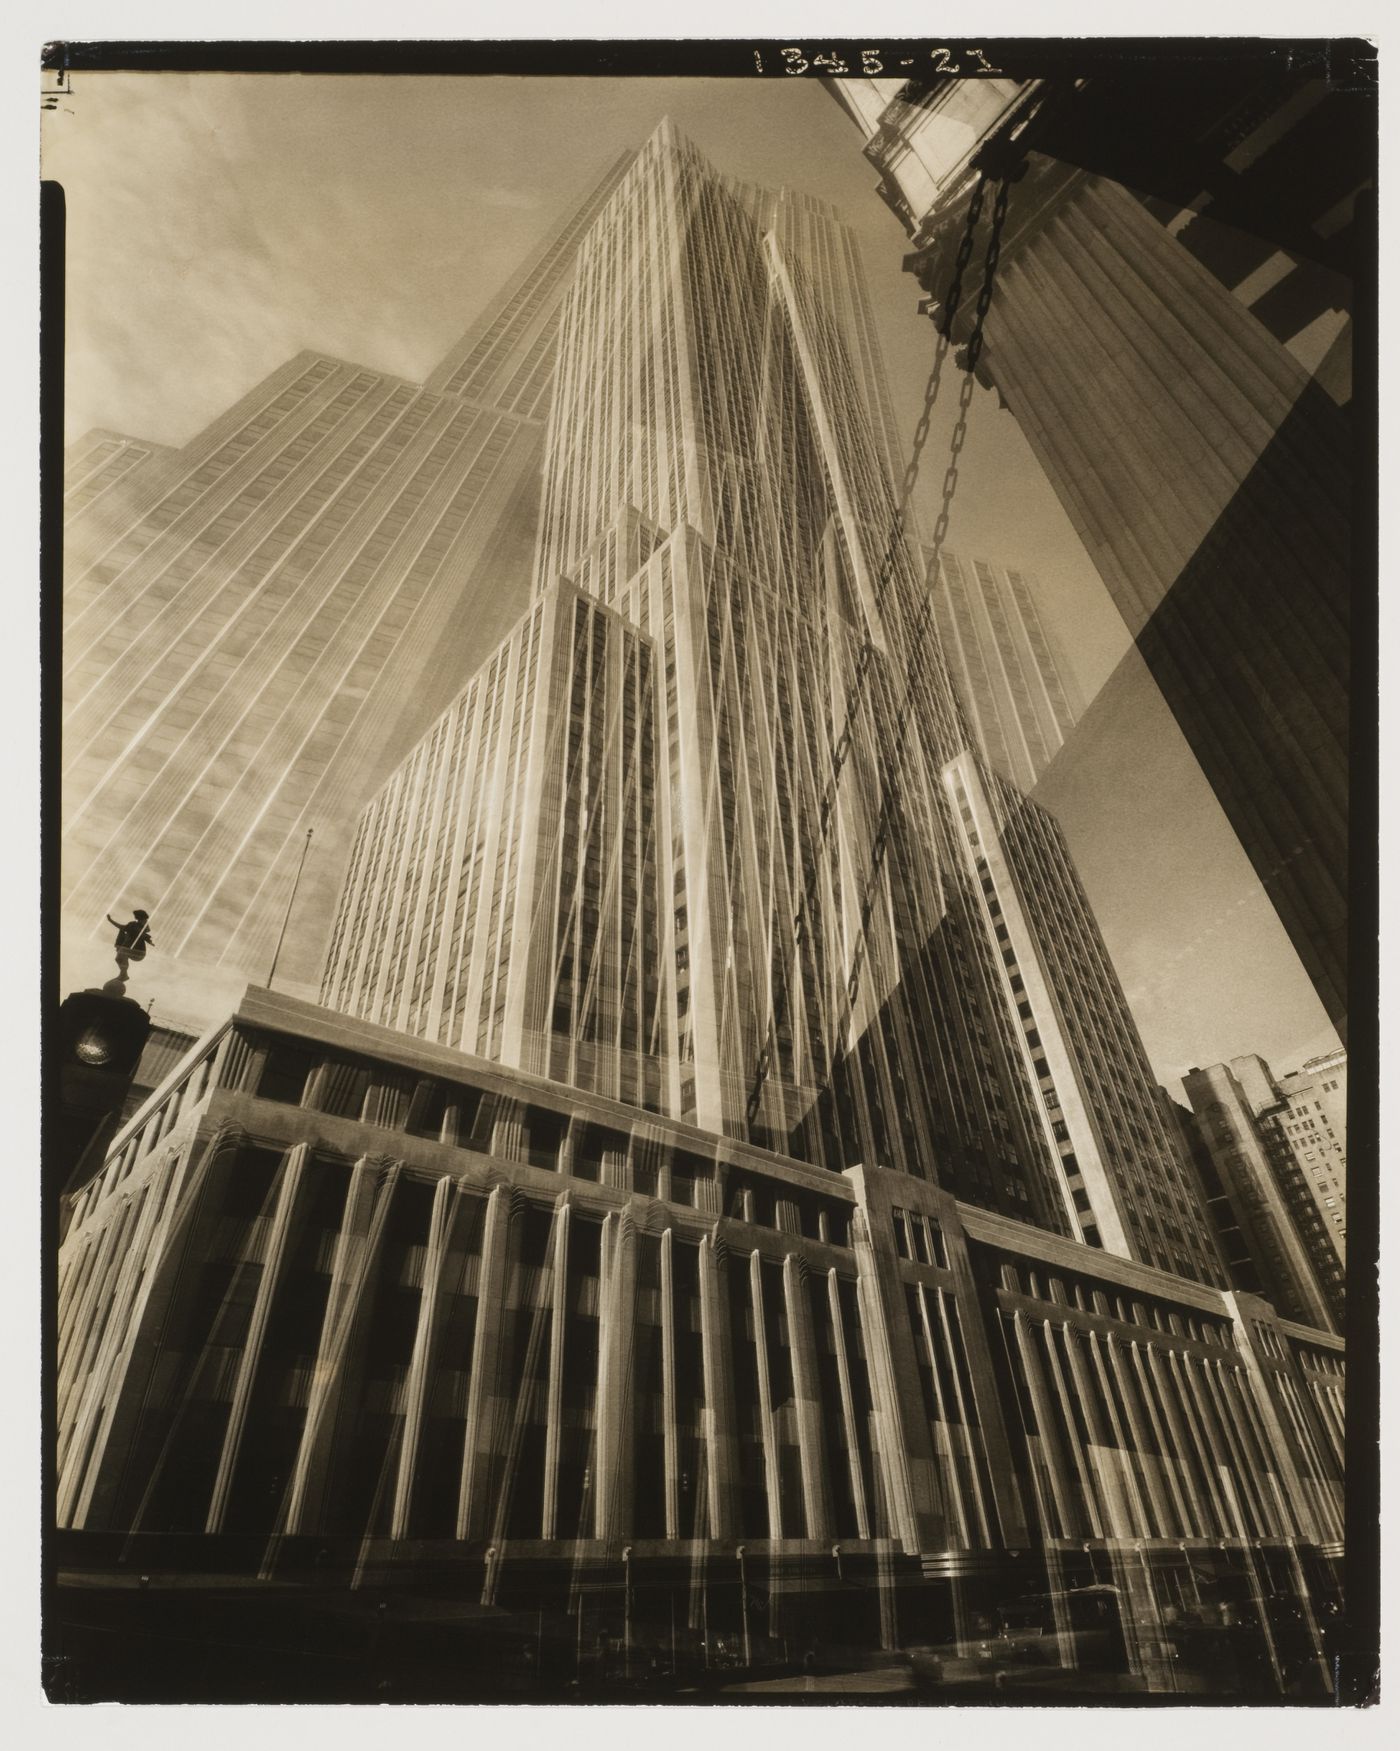 "The Maypole" (Double exposure of the Empire State Building)